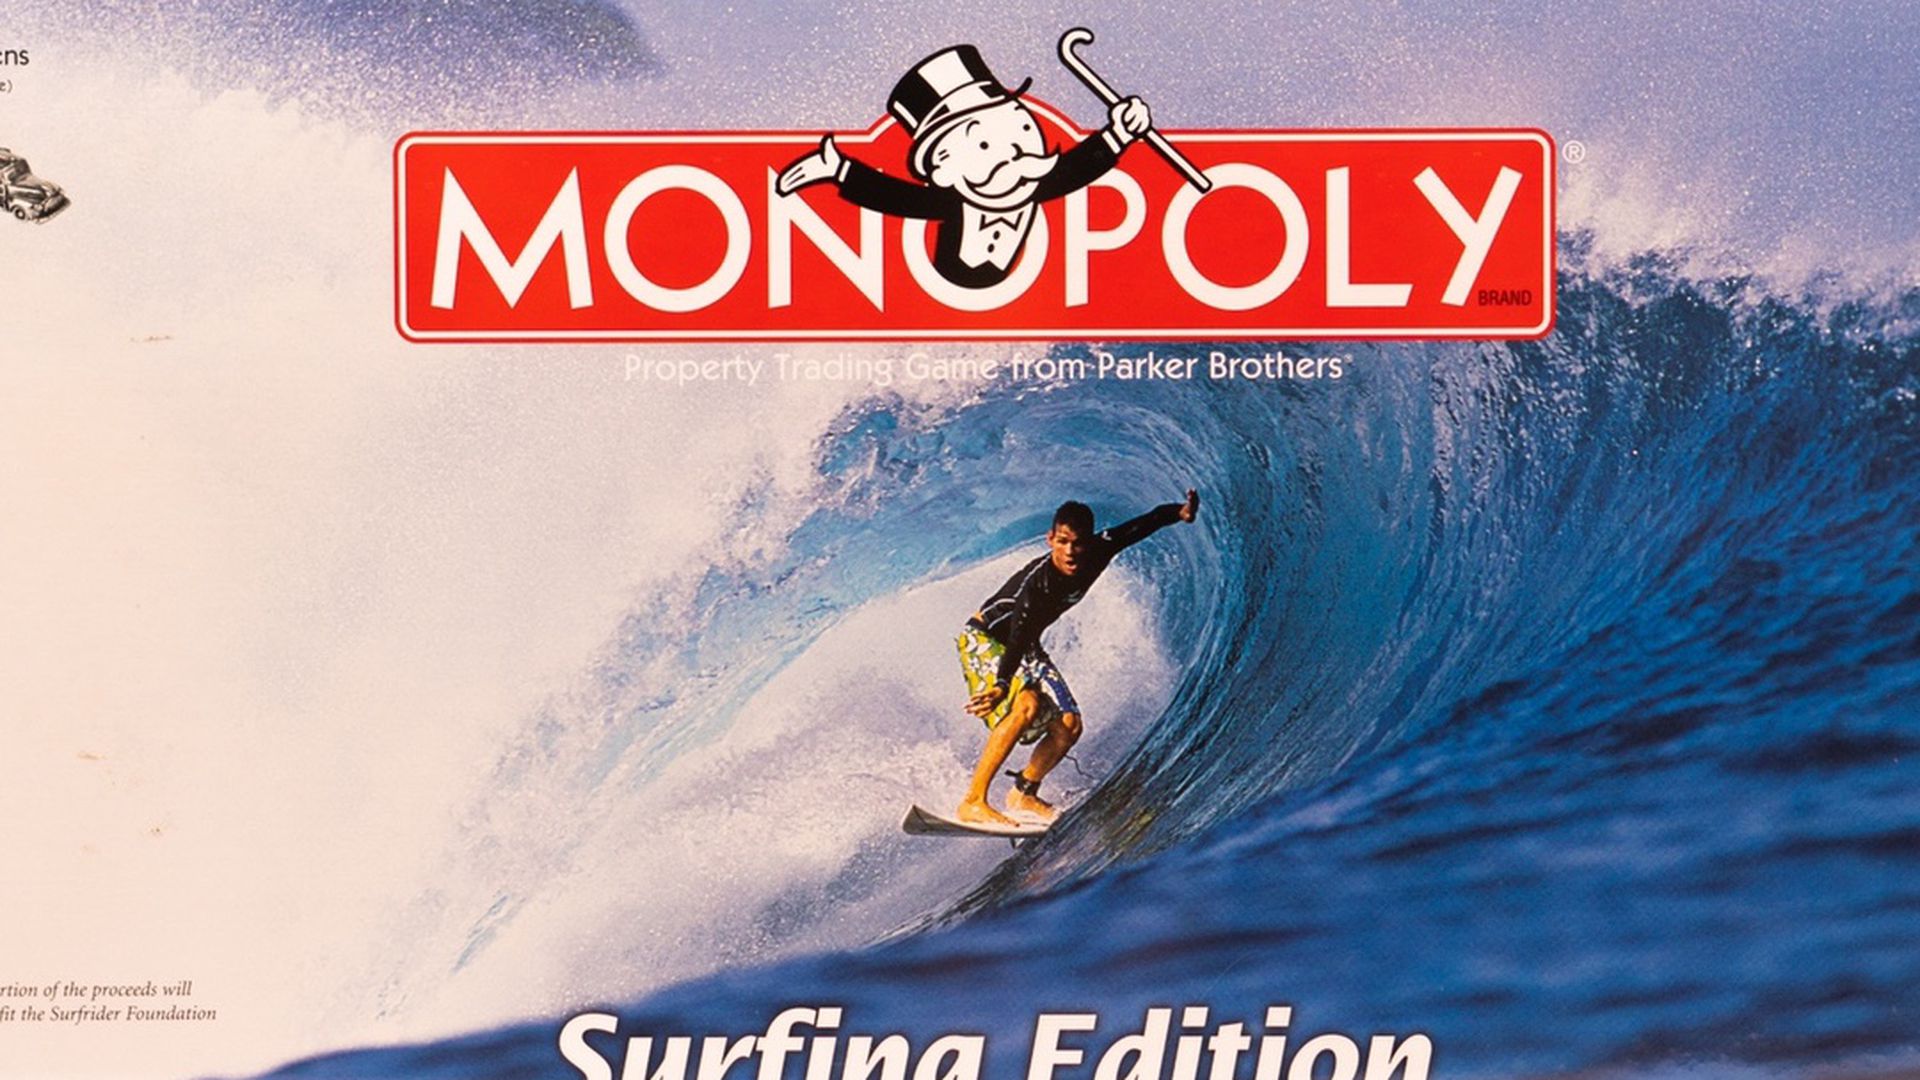 Surfing Edition Monopoly